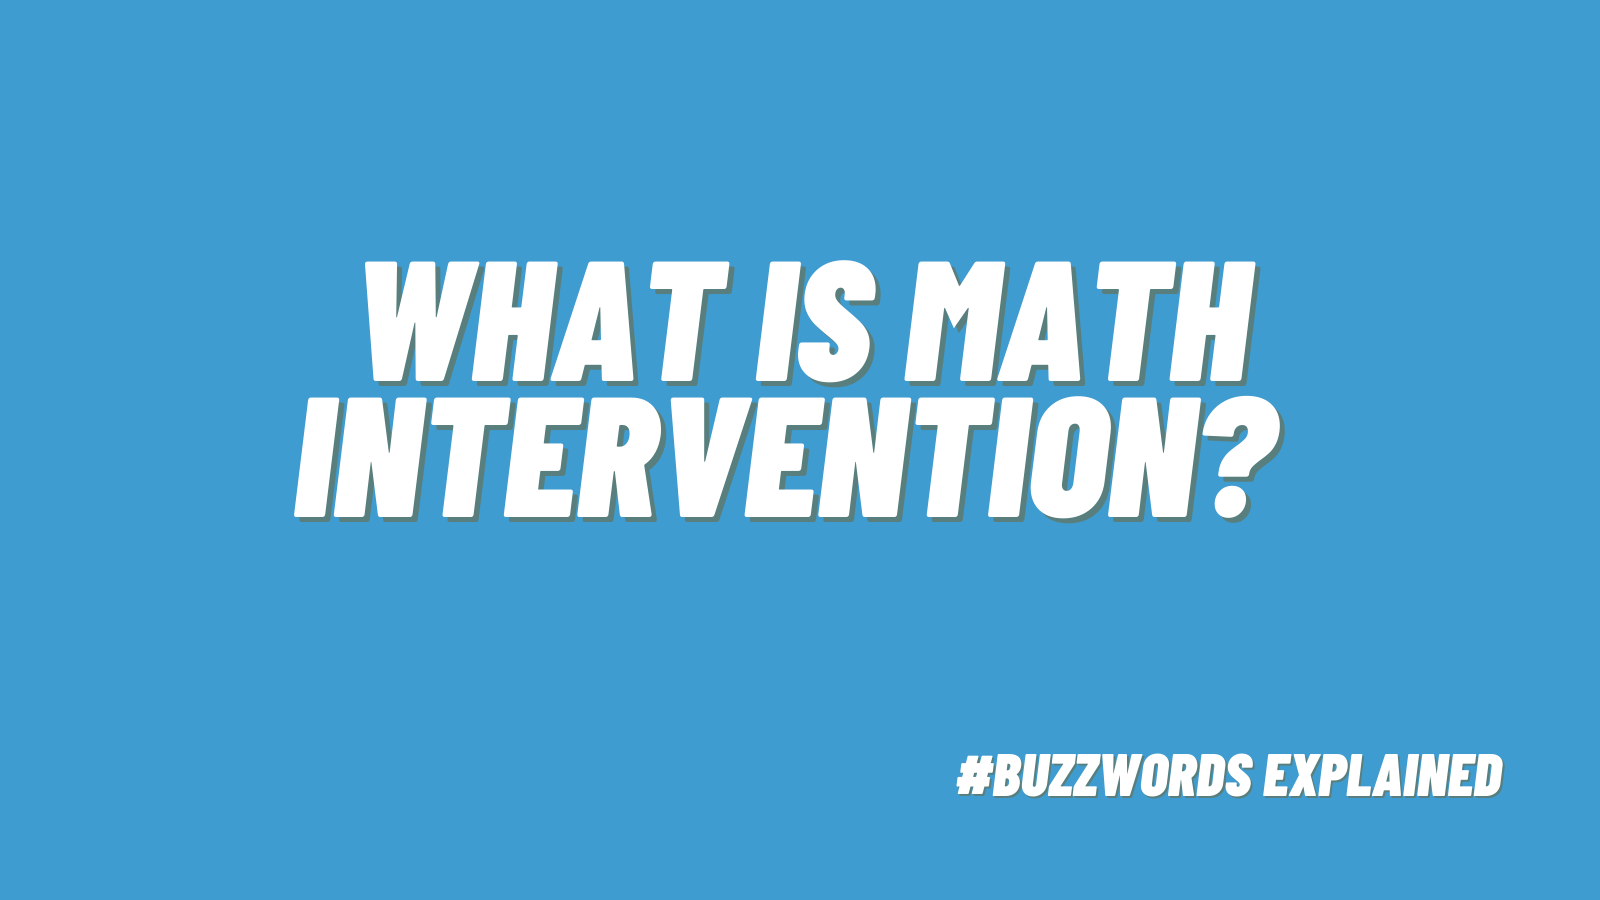 what is math intervention?